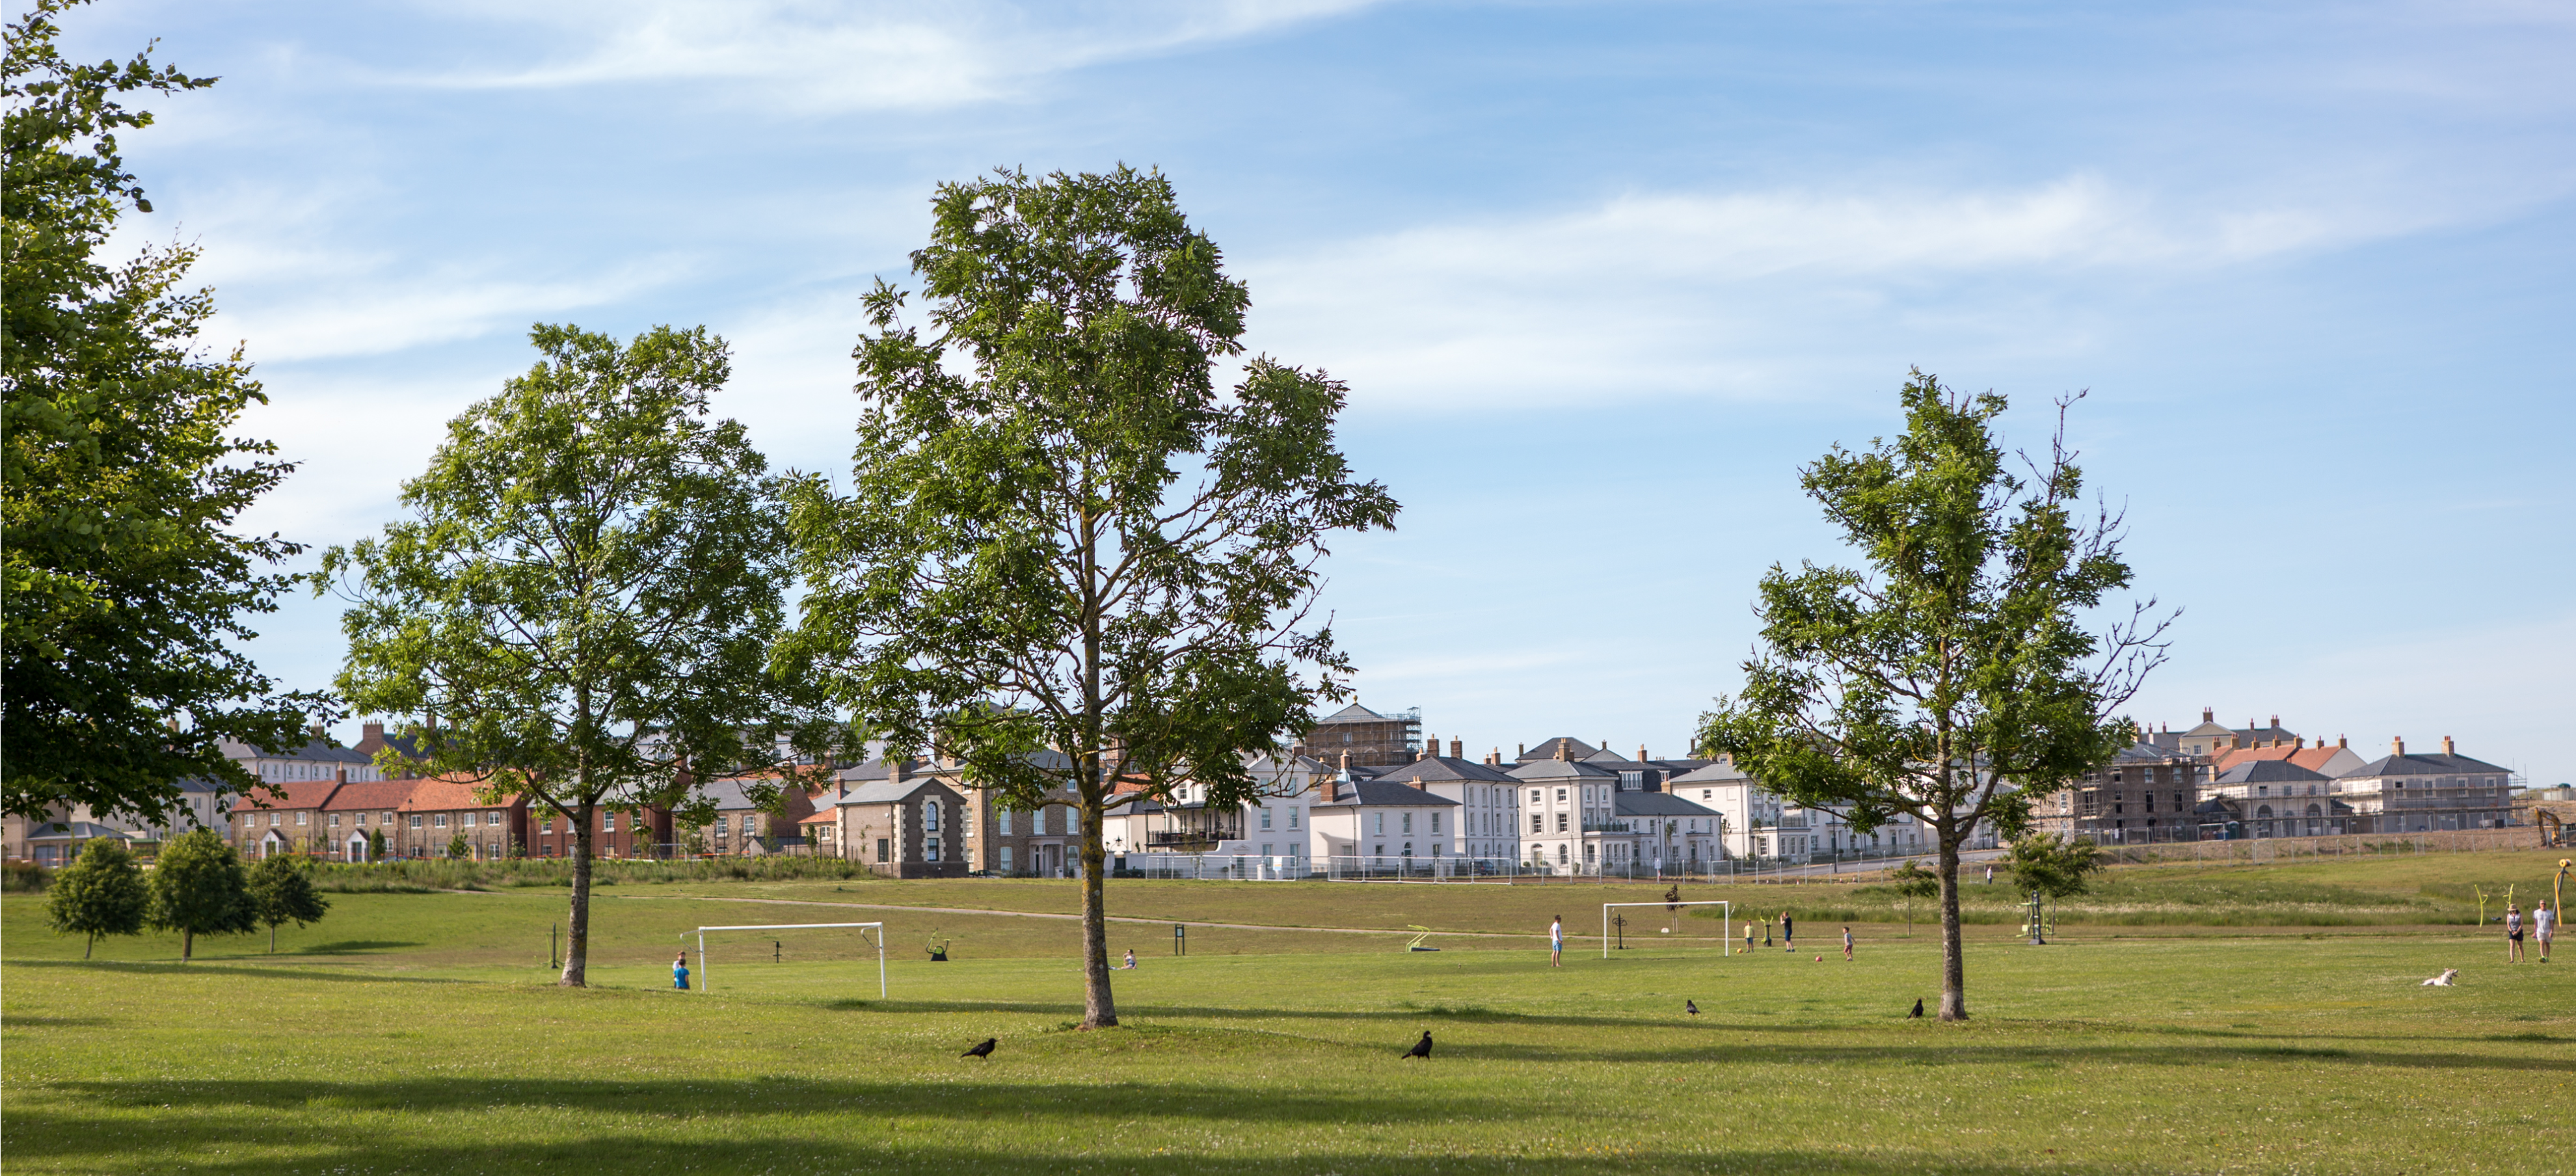 Football field at Poundbury showing trees and town in the distance